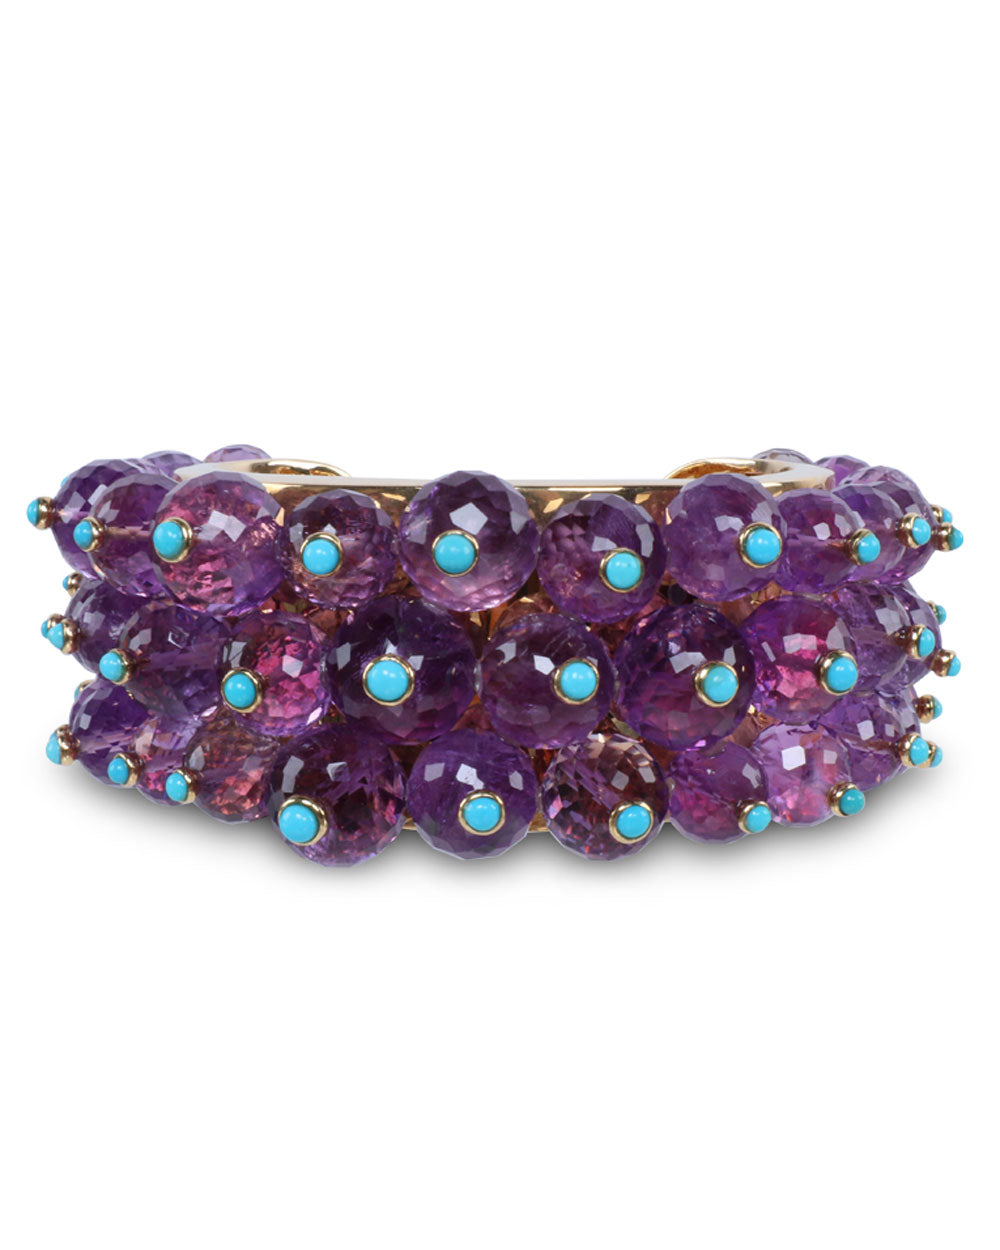 Amethyst and Turquoise Cuff